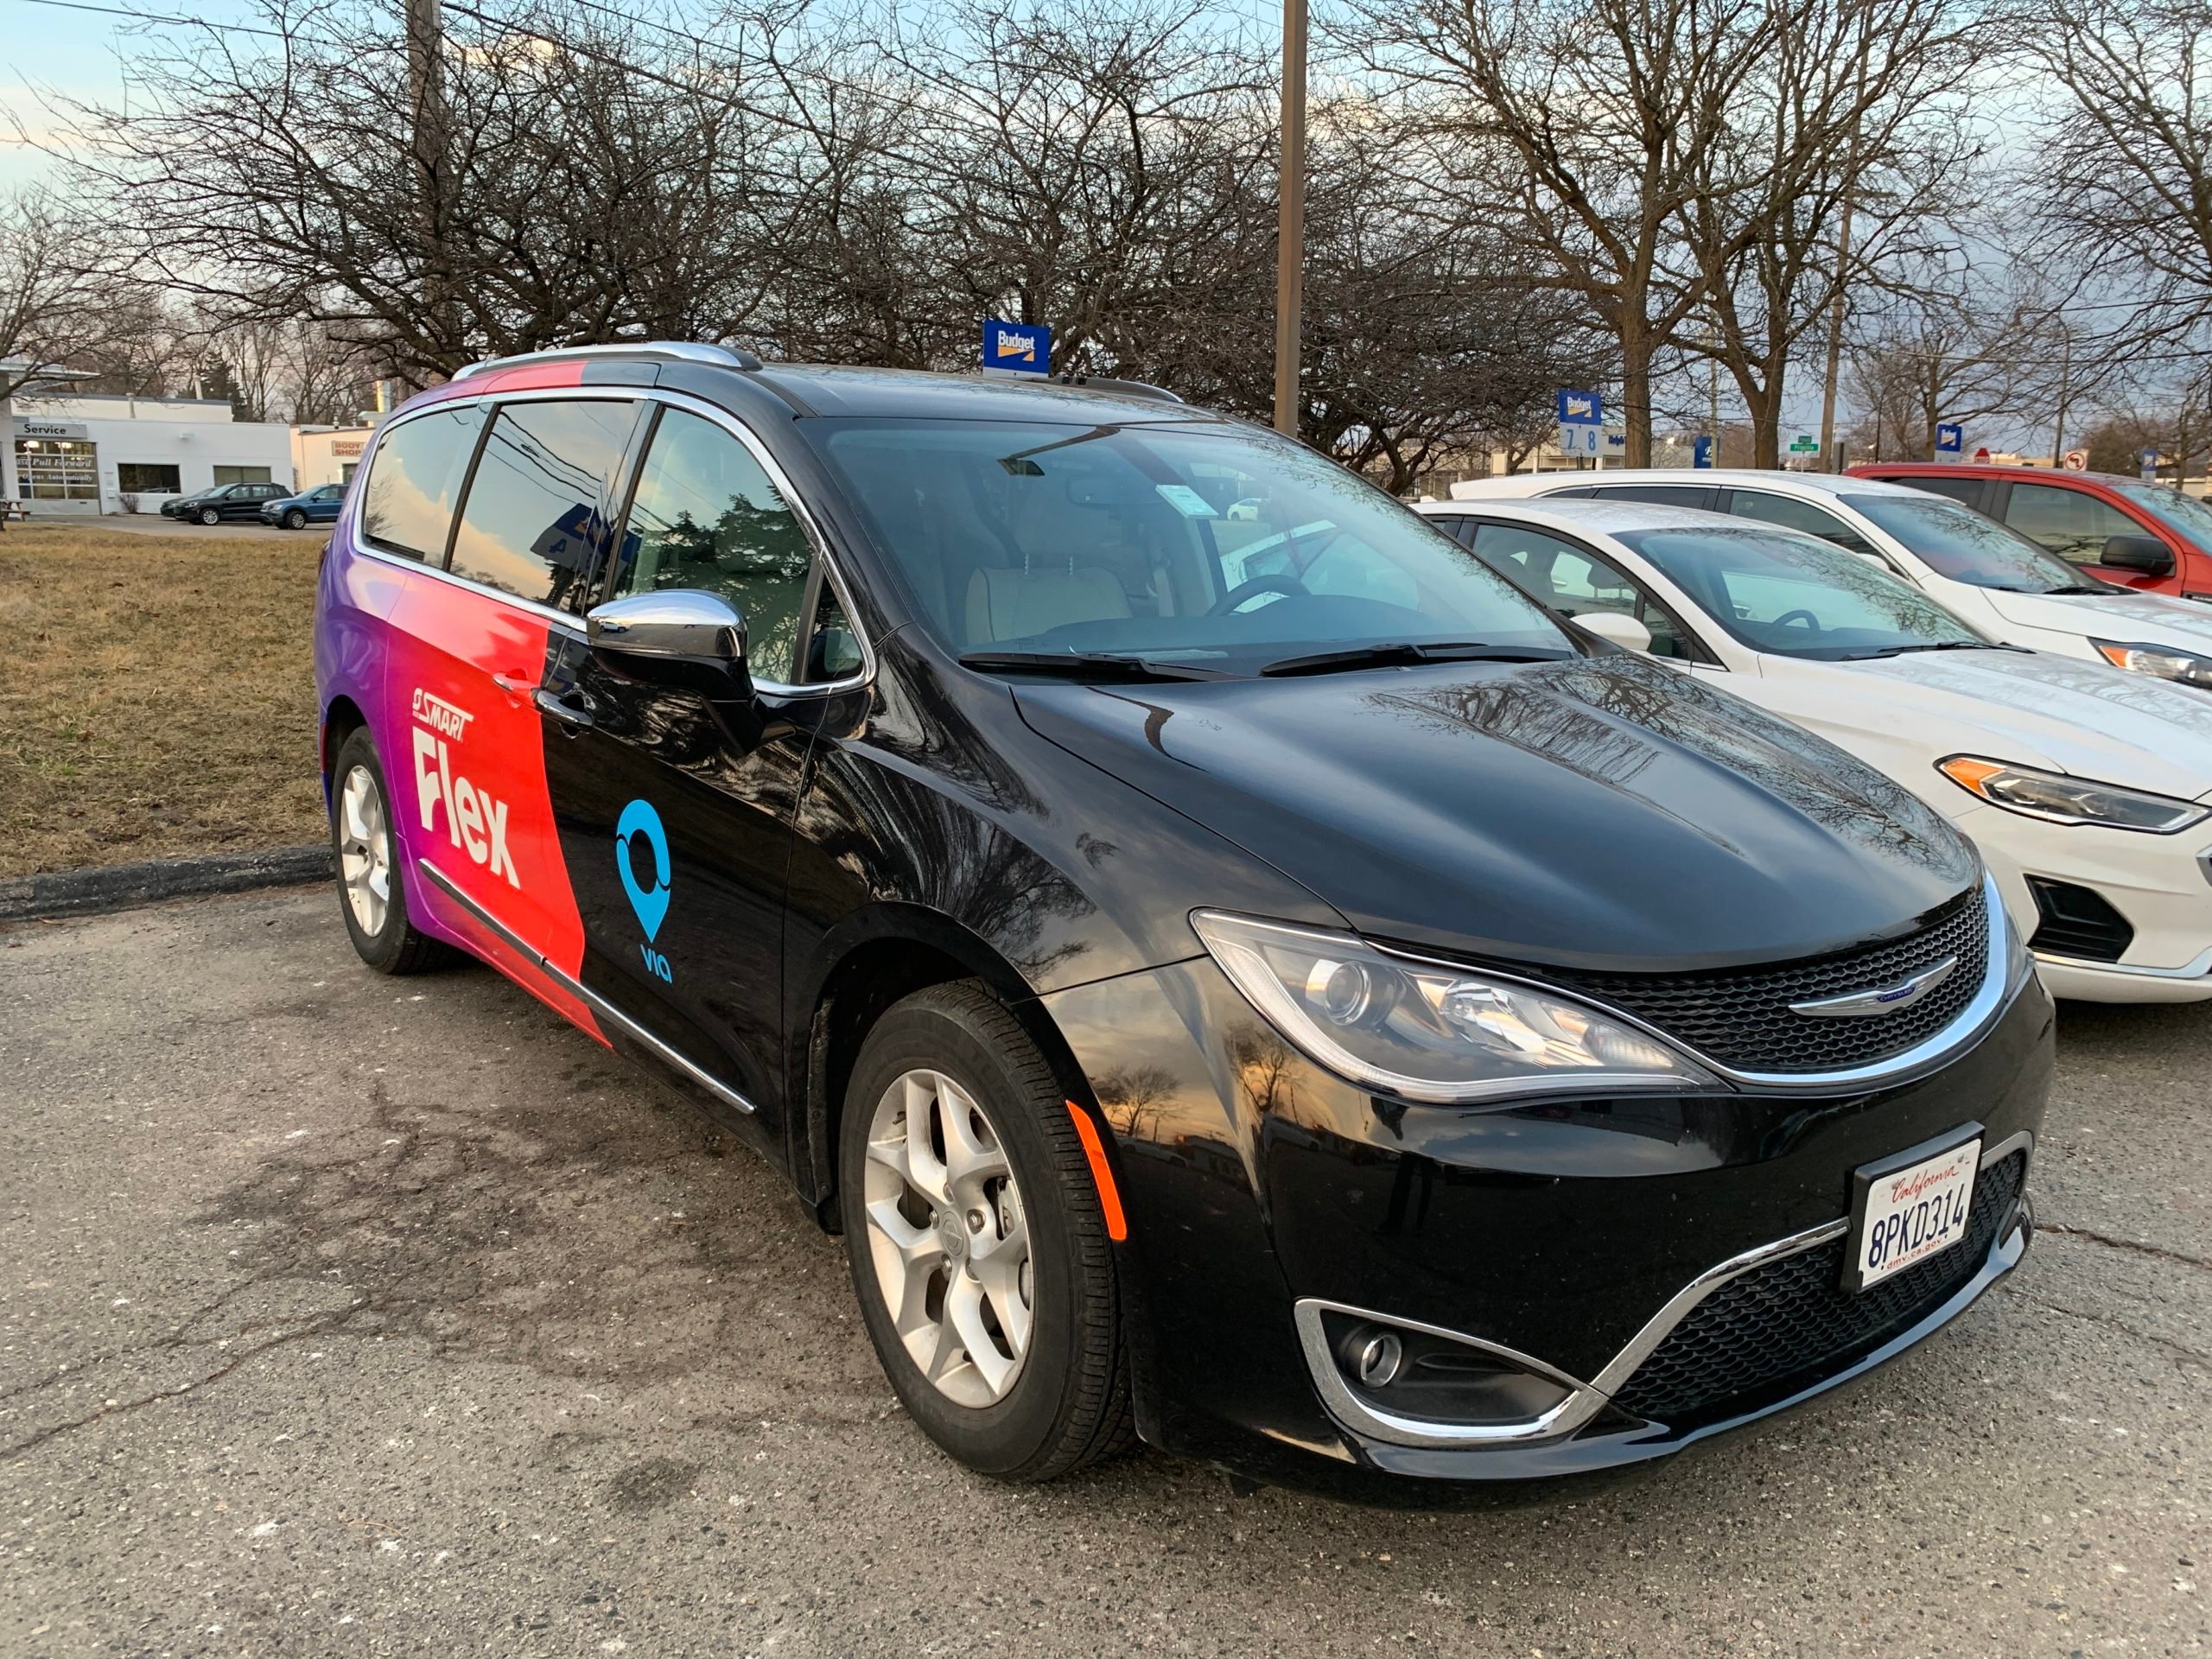 SMART launches on-demand small shuttles in three Metro Detroit